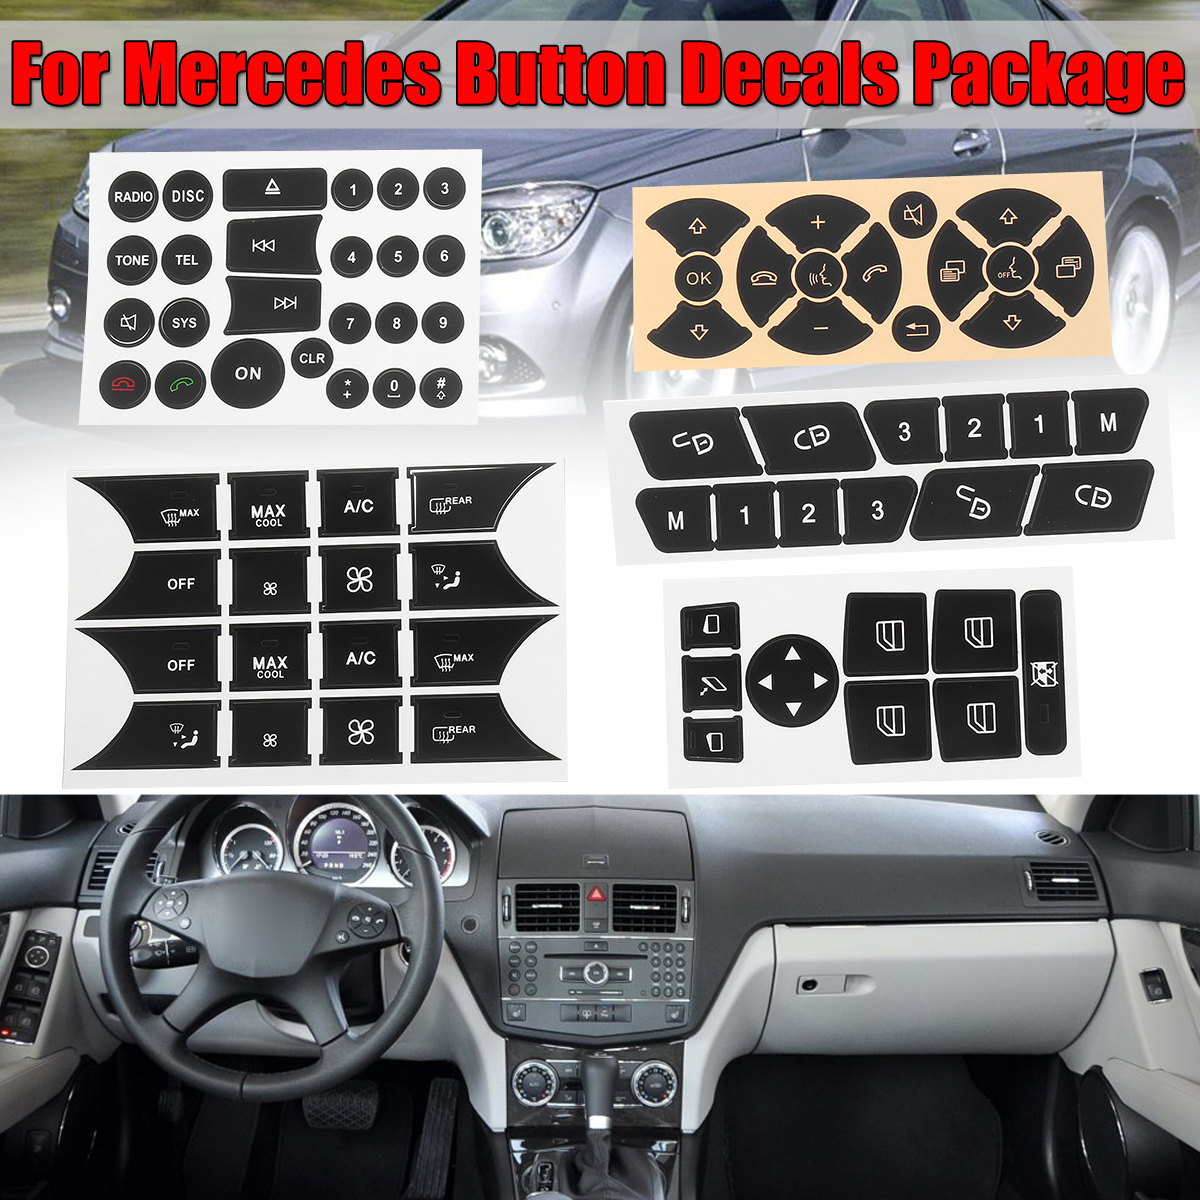 Button Repair Package Steering AC Window Car Decals Stickers for Mercedes Benz 2007-2014